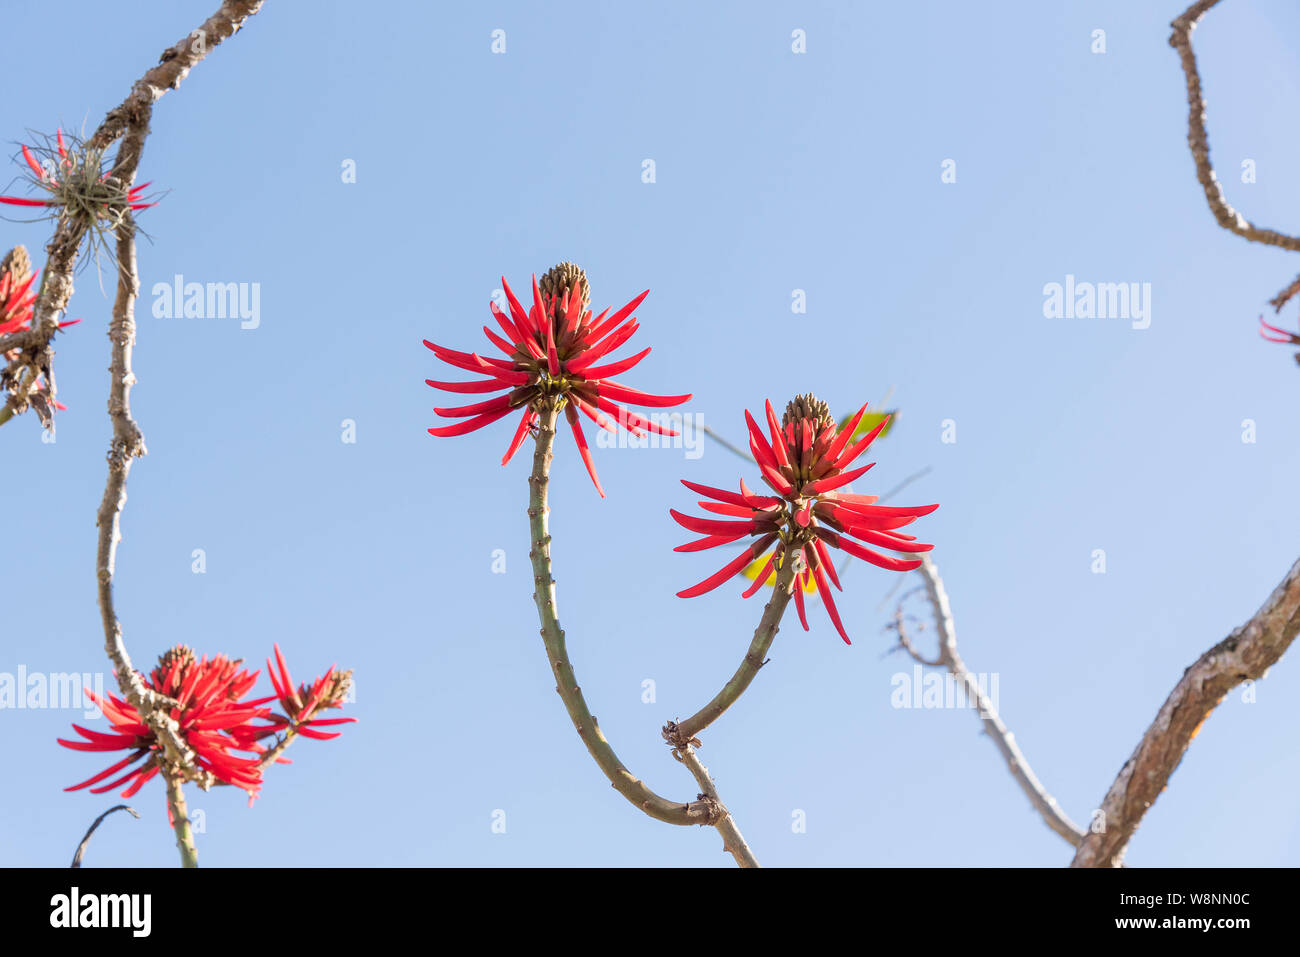 Eritrina Flowers-Chandelier (Erythrina speciosa). Tree that measures 3 to 5 meters high. The plant has thorns and is widely used in landscaping due Stock Photo